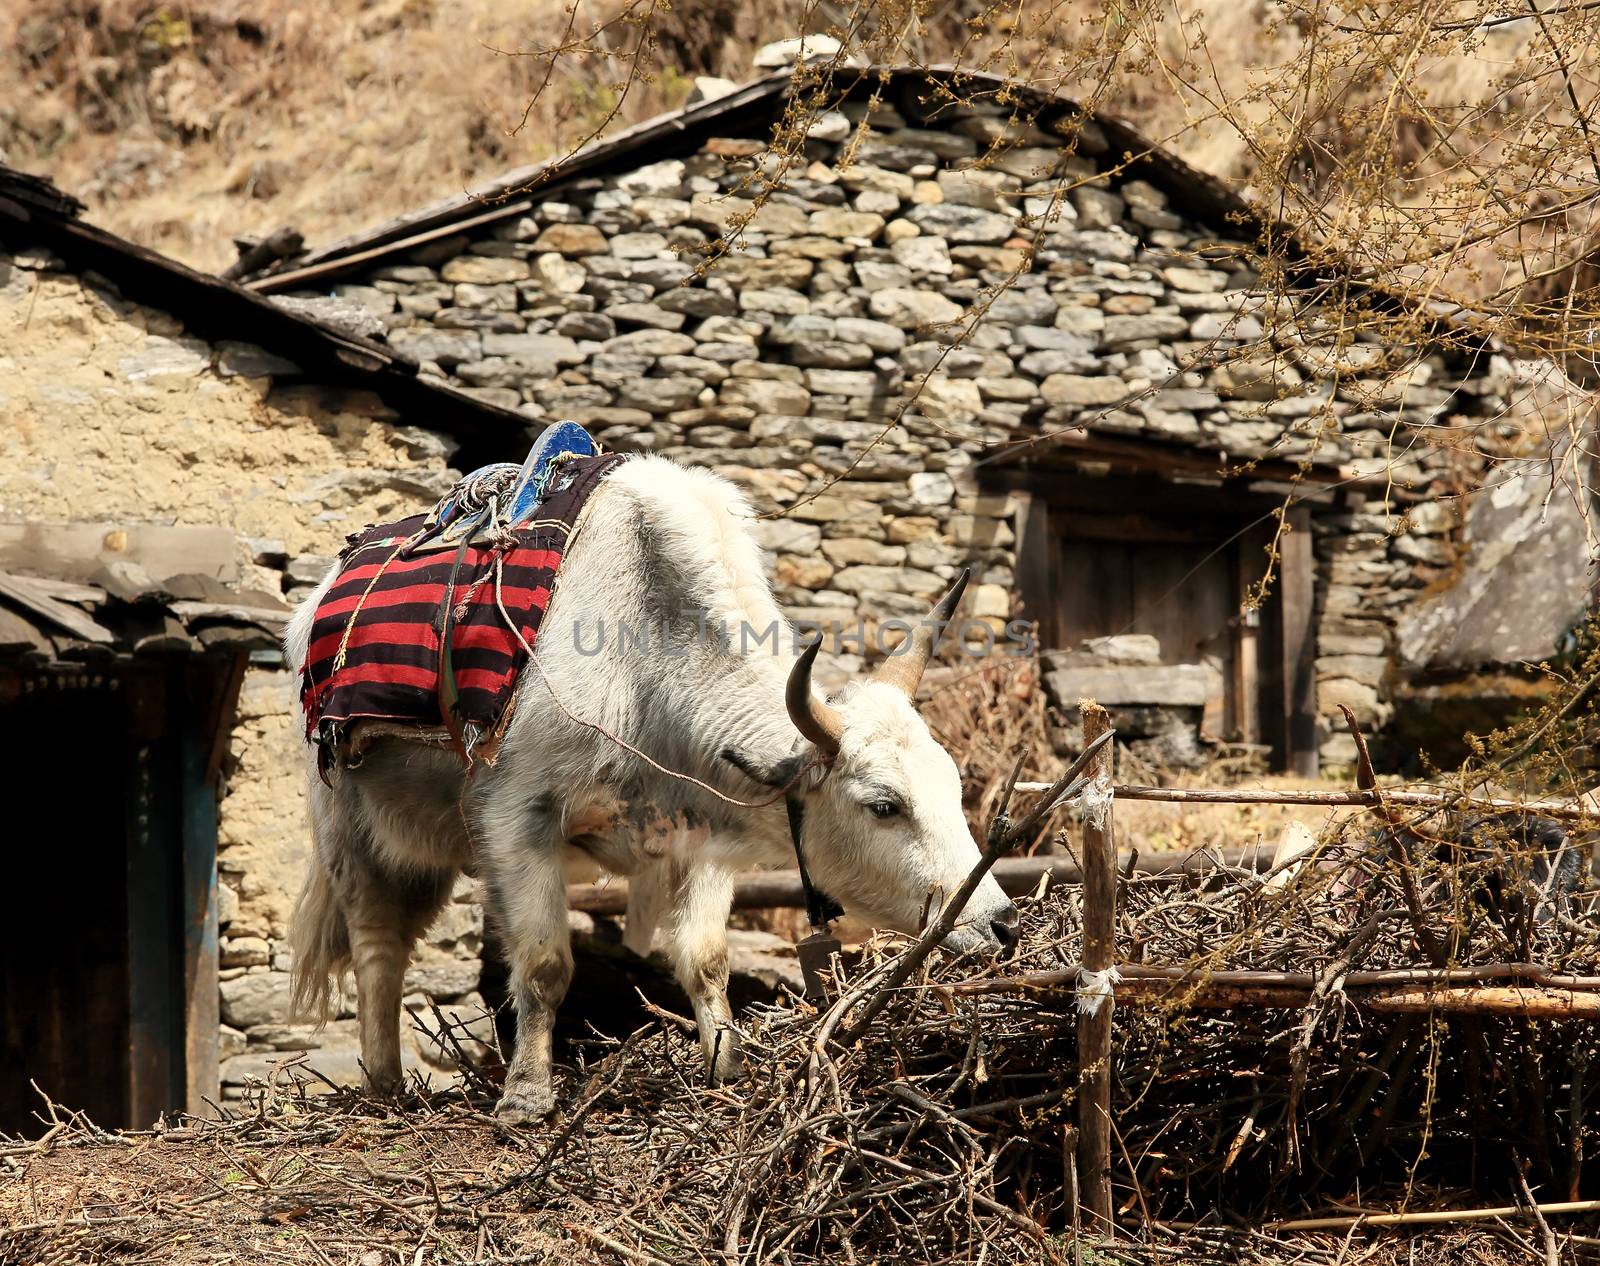 Yak tethered near a stone house in the Himalayas. Everest region by aptyp_kok